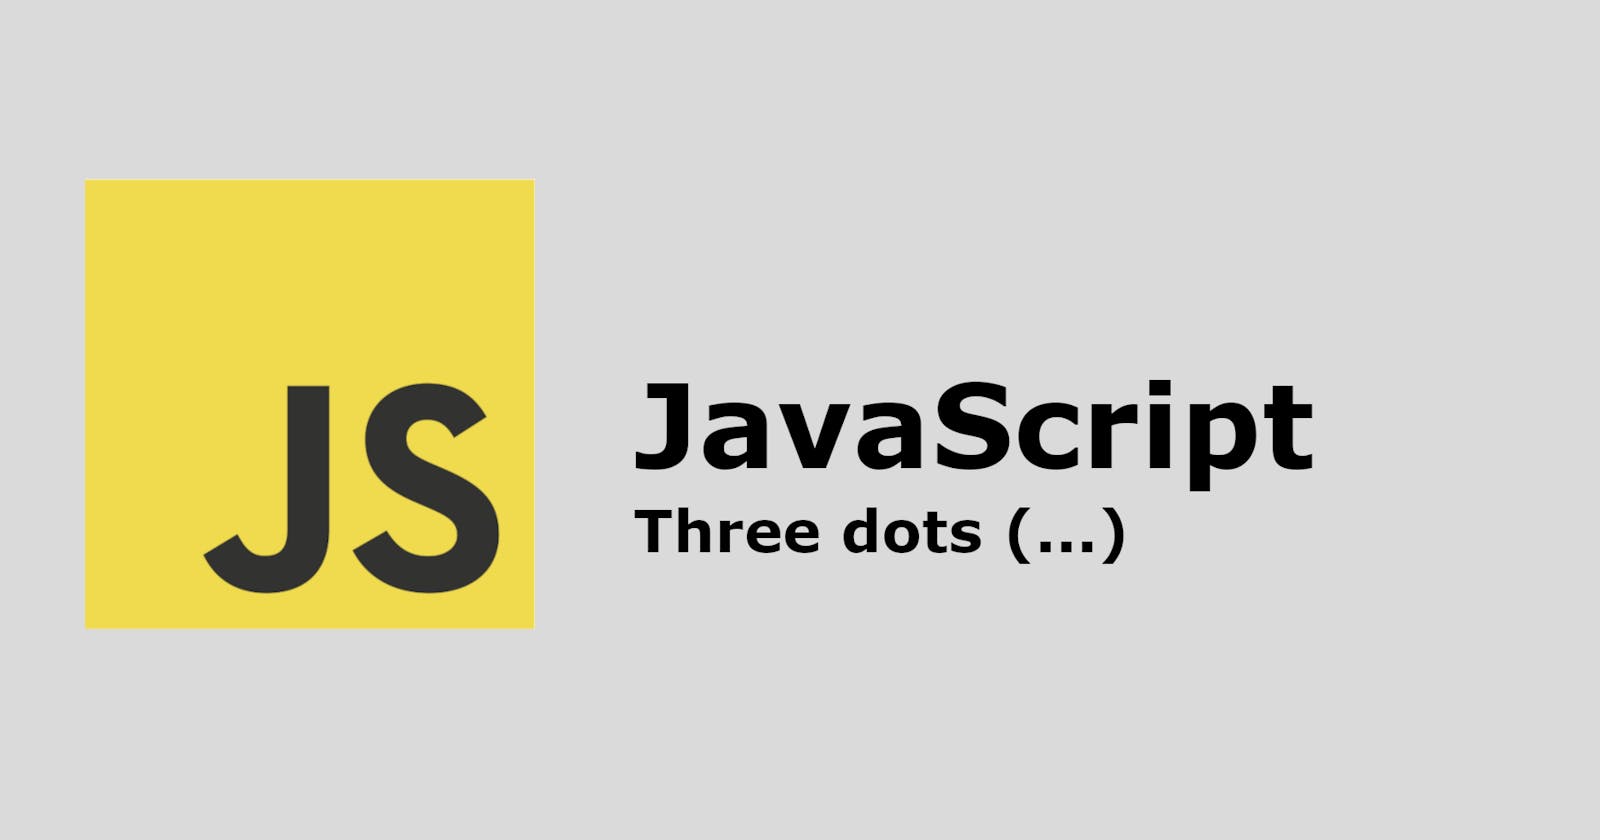 What Are Three Dots (…) In JavaScript?